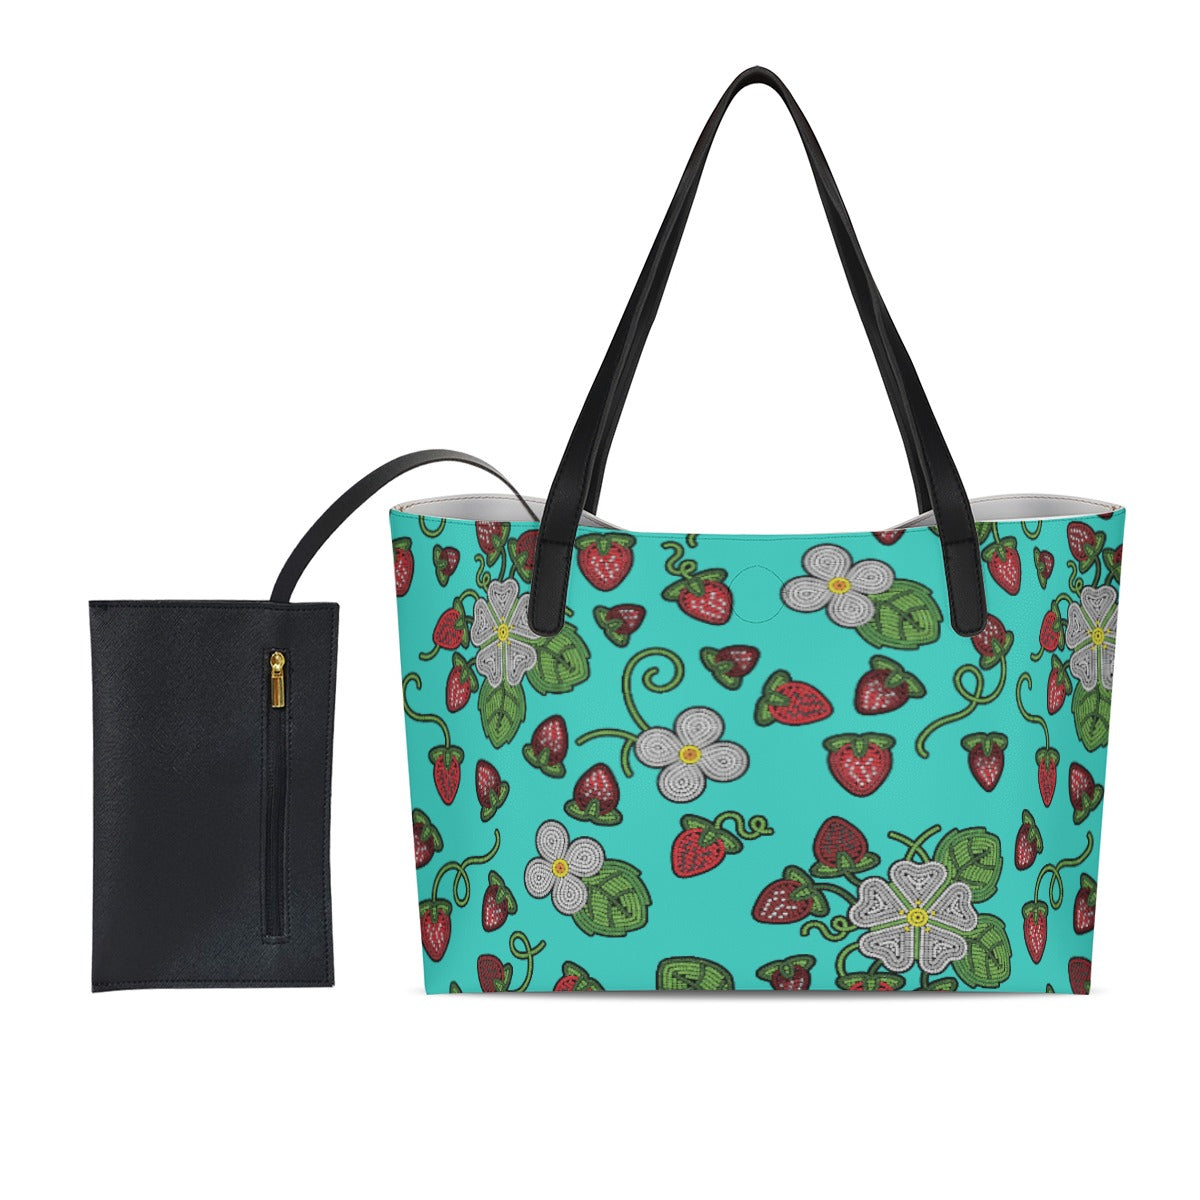 Strawberry Dreams Turquoise Shopping Tote Bag With Black Mini Purse